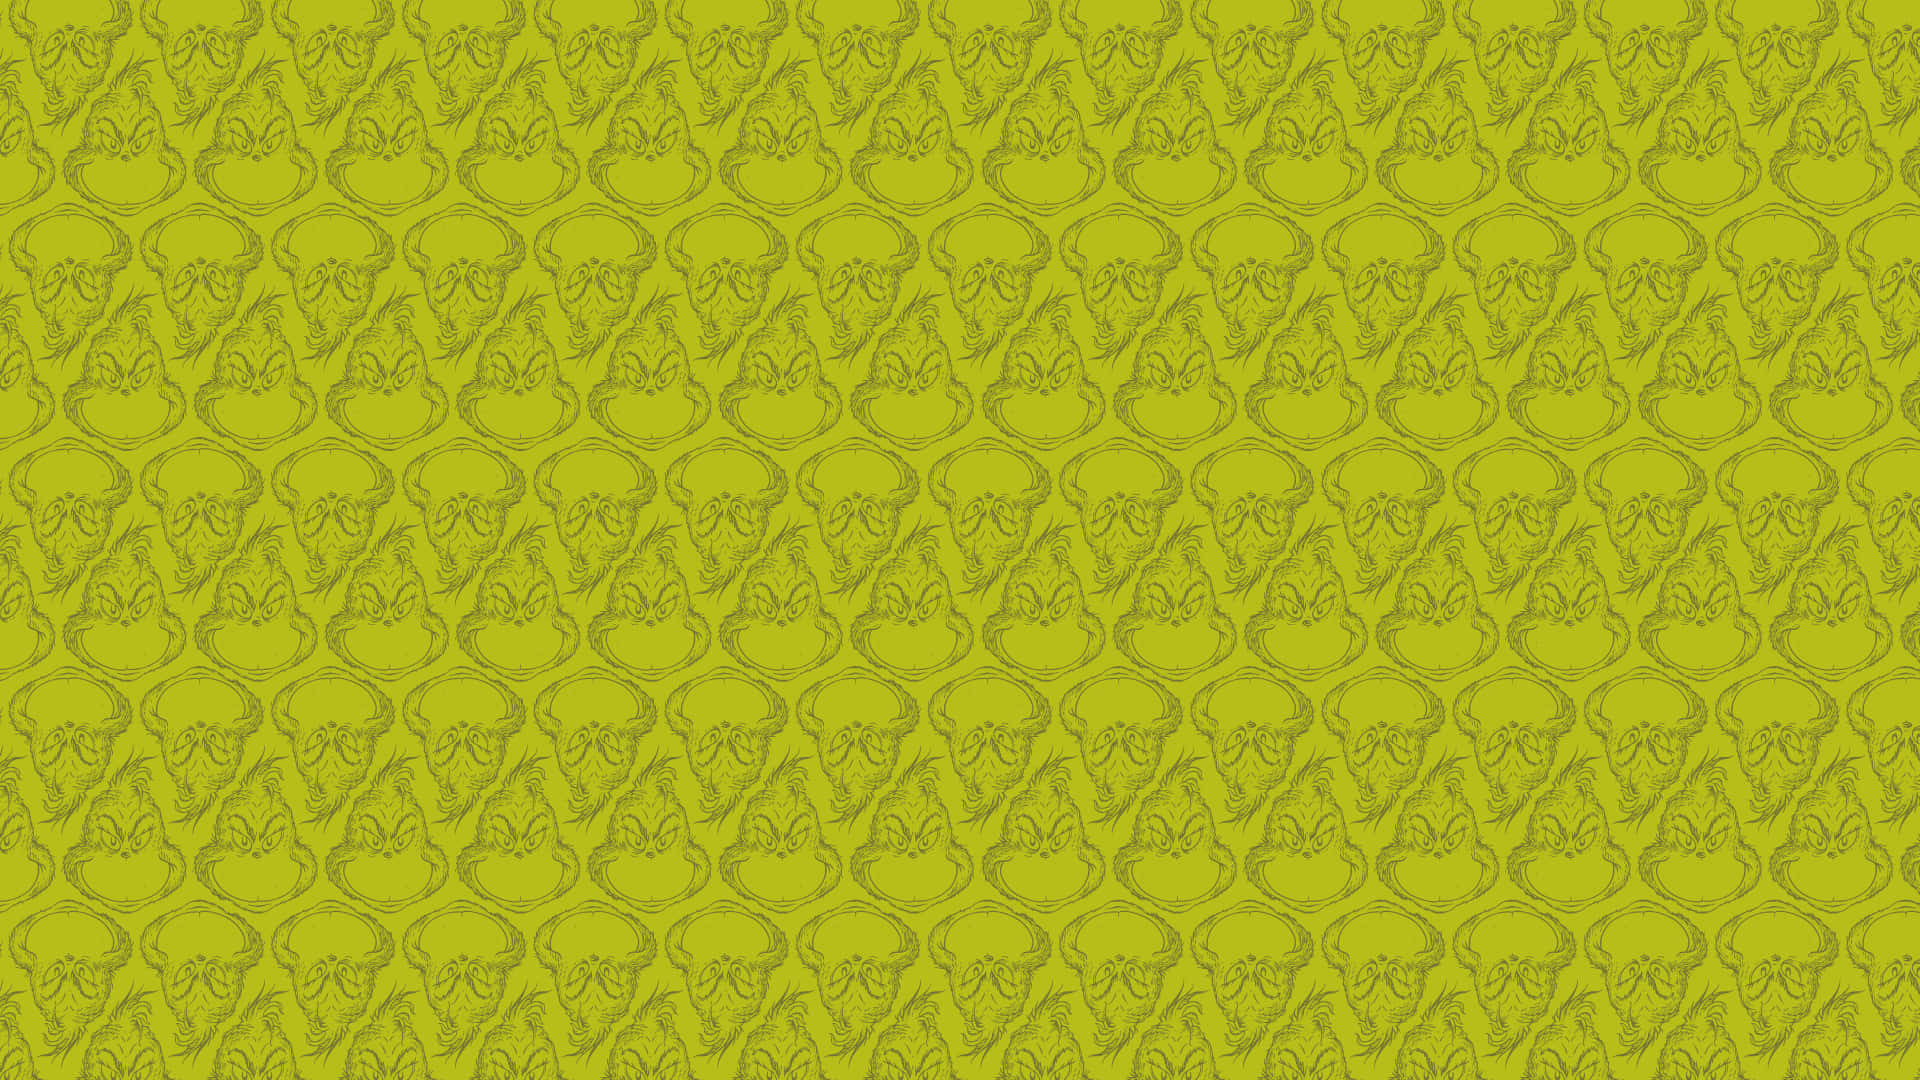 Get ready for the holidays with this festive Grinch Zoom Background!